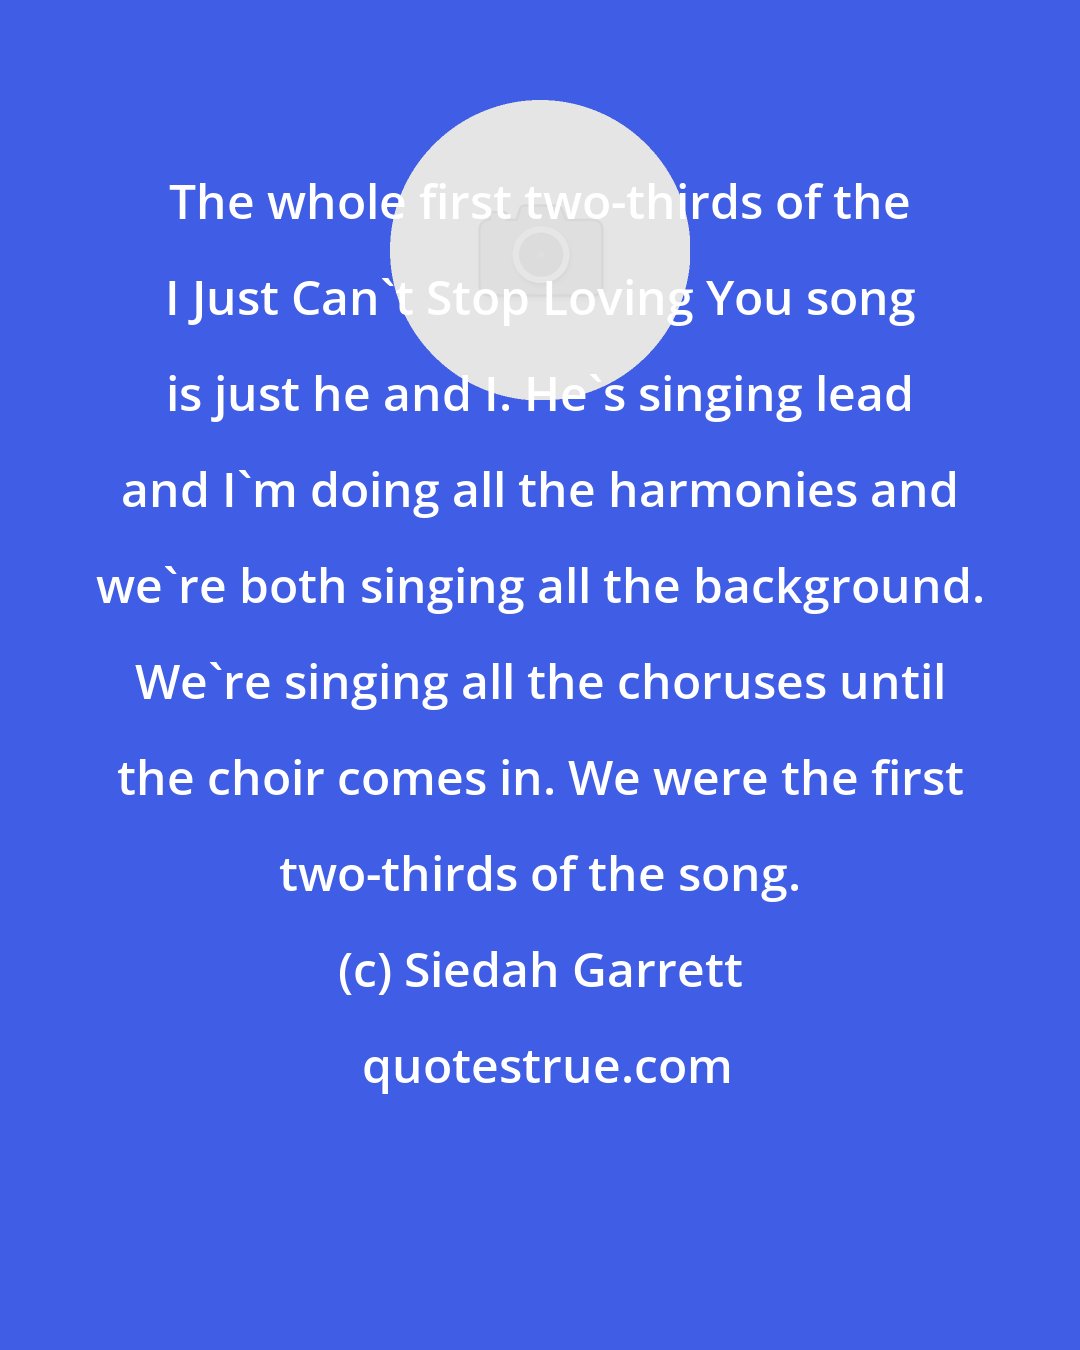 Siedah Garrett: The whole first two-thirds of the I Just Can't Stop Loving You song is just he and I. He's singing lead and I'm doing all the harmonies and we're both singing all the background. We're singing all the choruses until the choir comes in. We were the first two-thirds of the song.